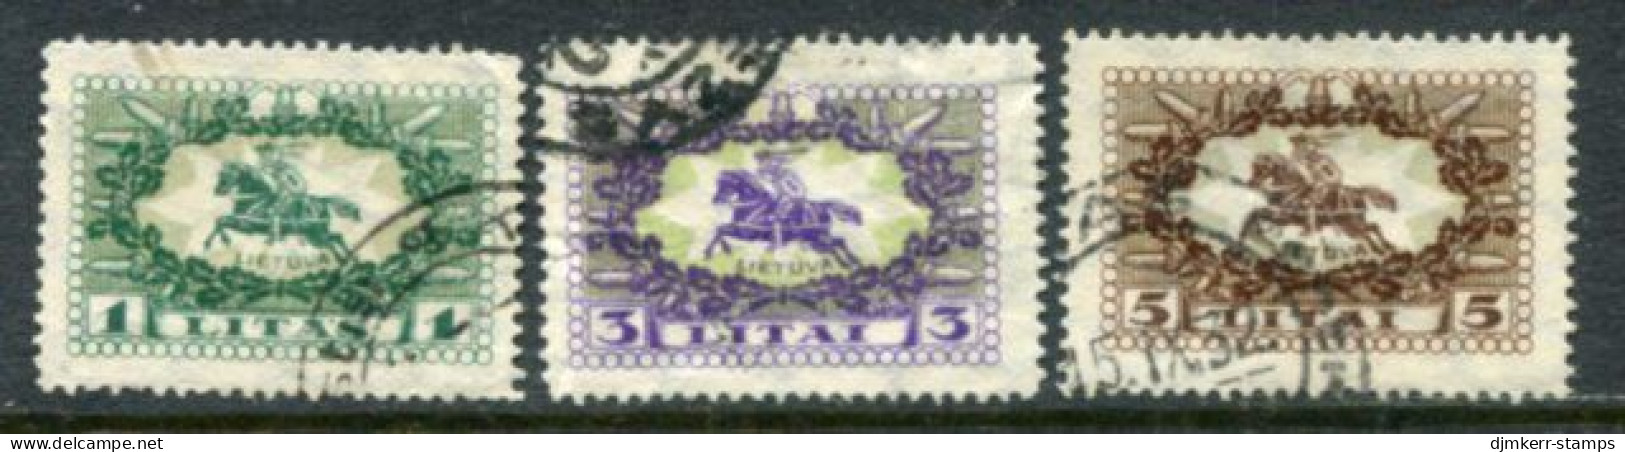 LITHUANIA 1927 Vytis  Definitive Used. Michel 278-80 - Lithuania